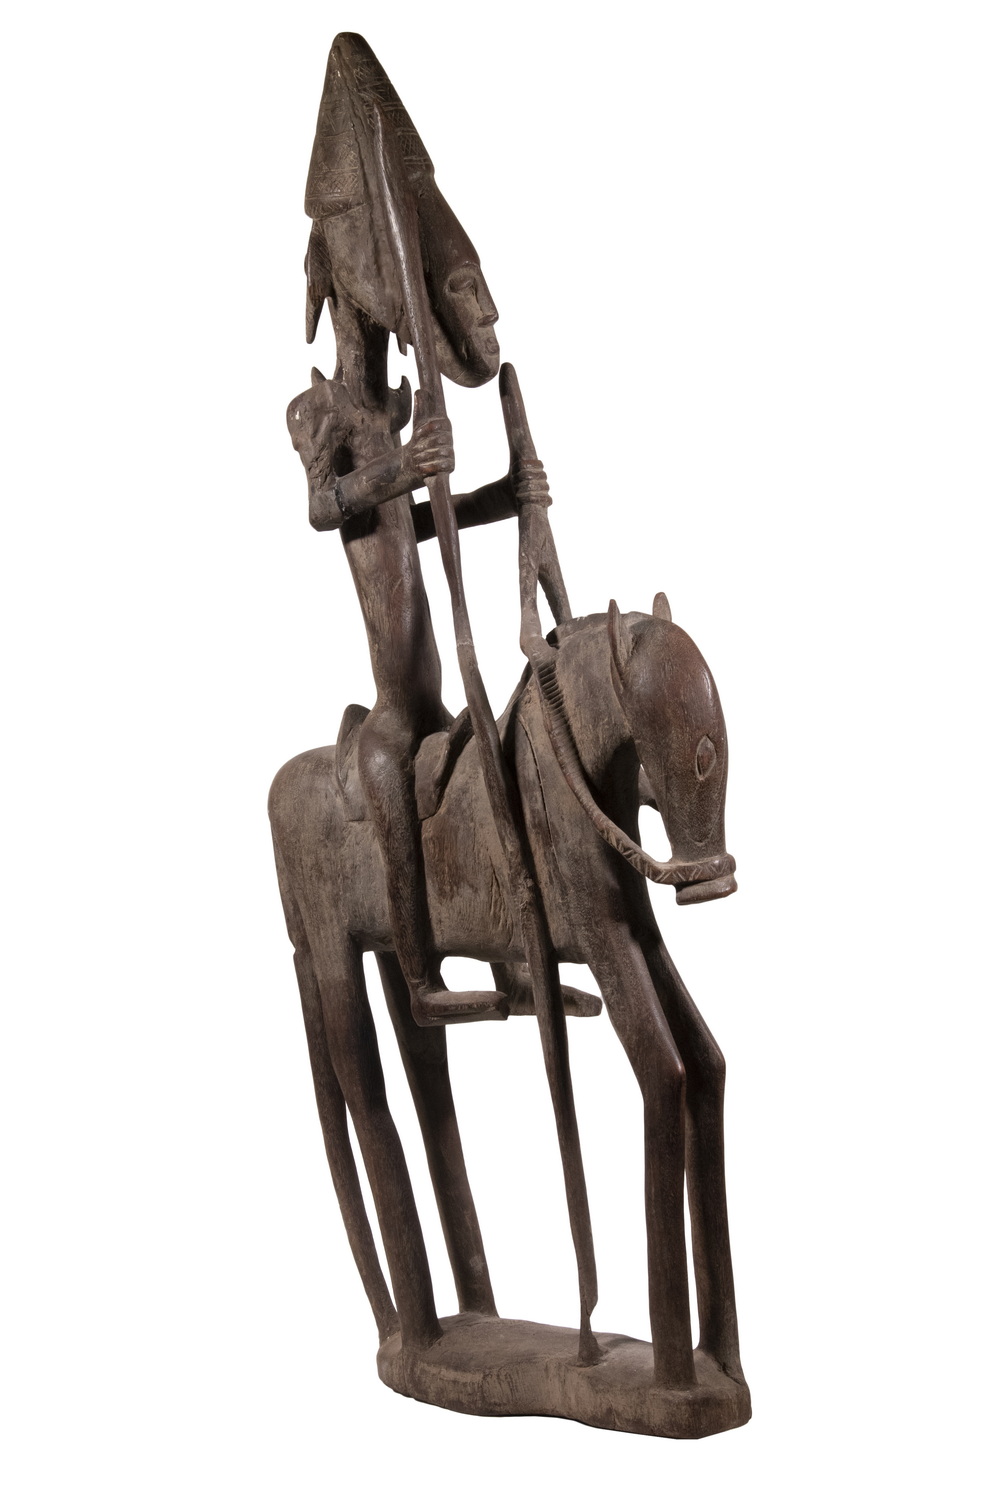 20TH C. AFRICAN WOOD SCULPTURE